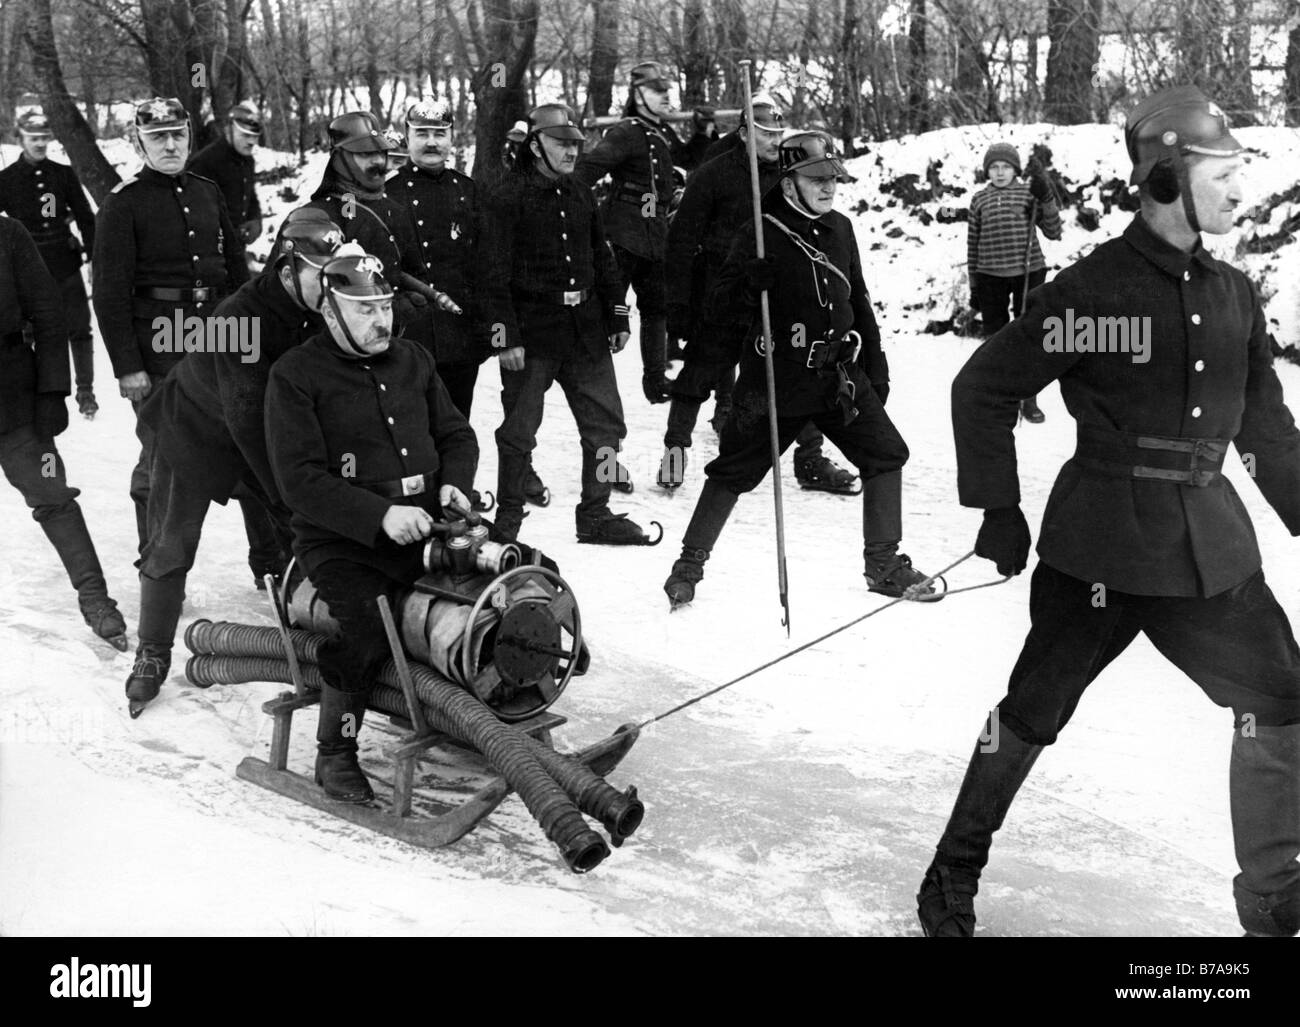 Historic picture, fire brigade with a sledge in ice and snow, taken around 1930 Stock Photo